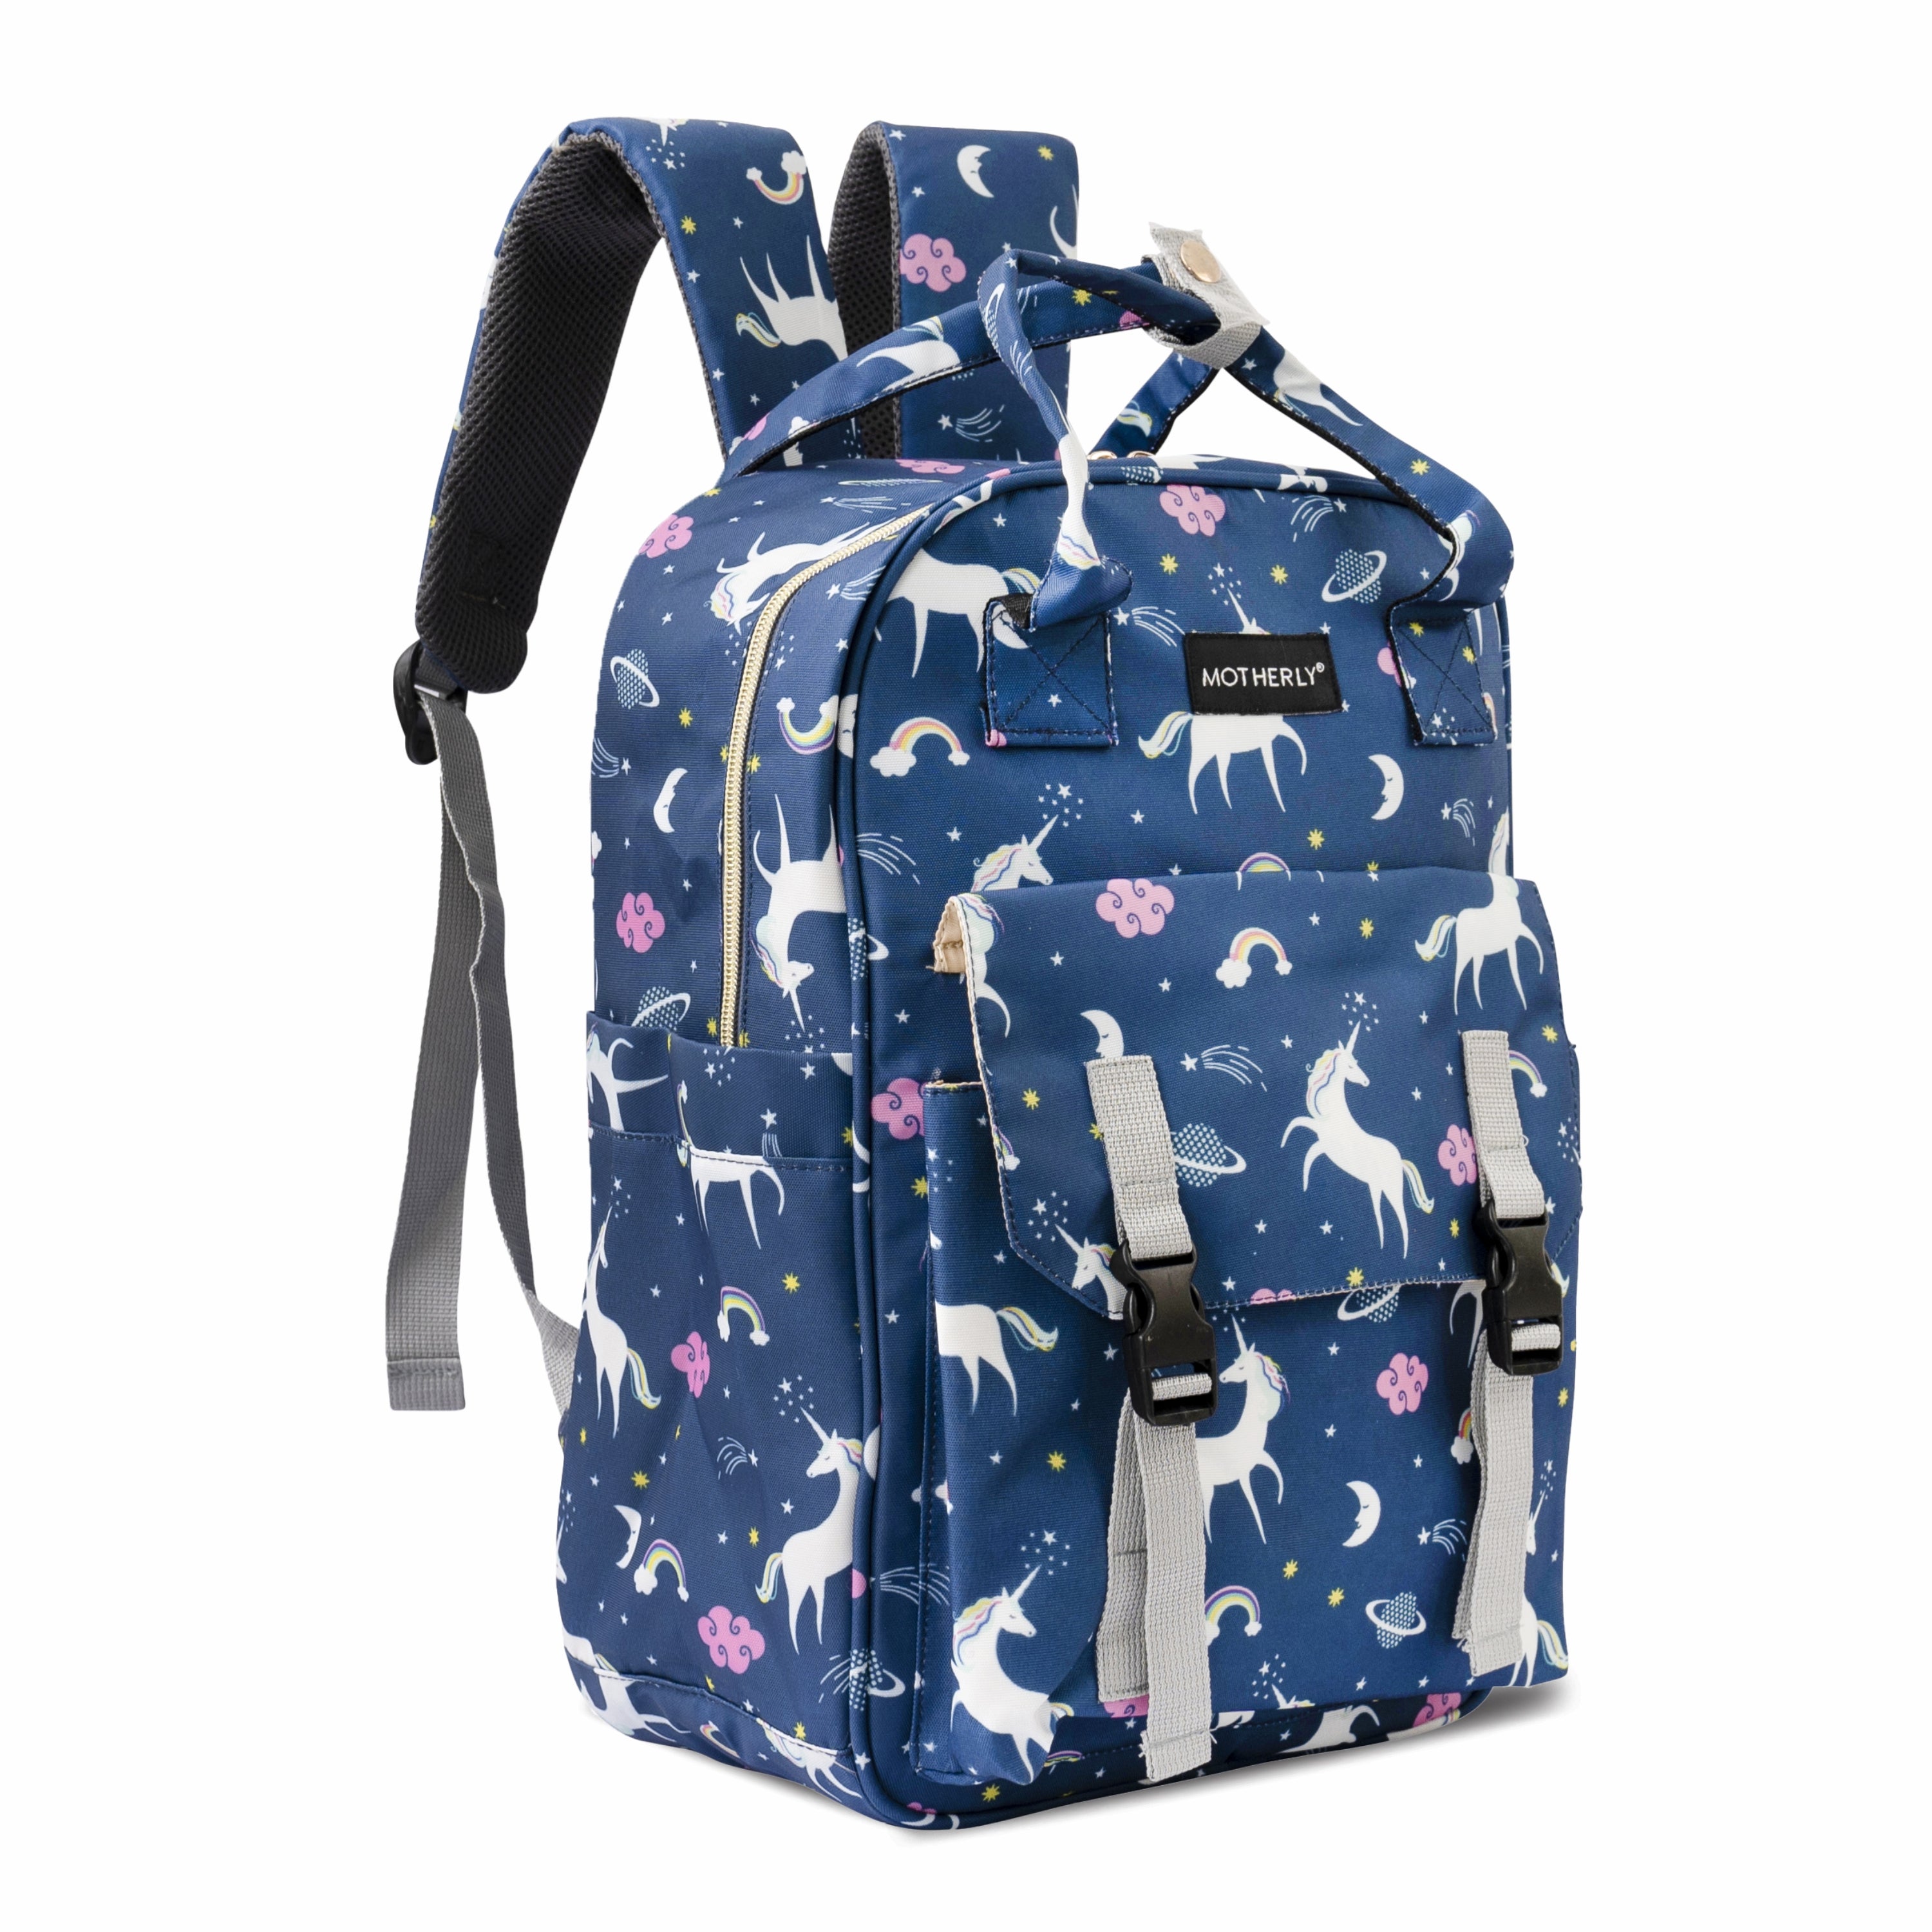 LuvLap Lily Diaper bag for mom & baby, Multfunctional & Watterproof with  Changing Mat Diaper Bag - Buy Baby Care Products in India | Flipkart.com